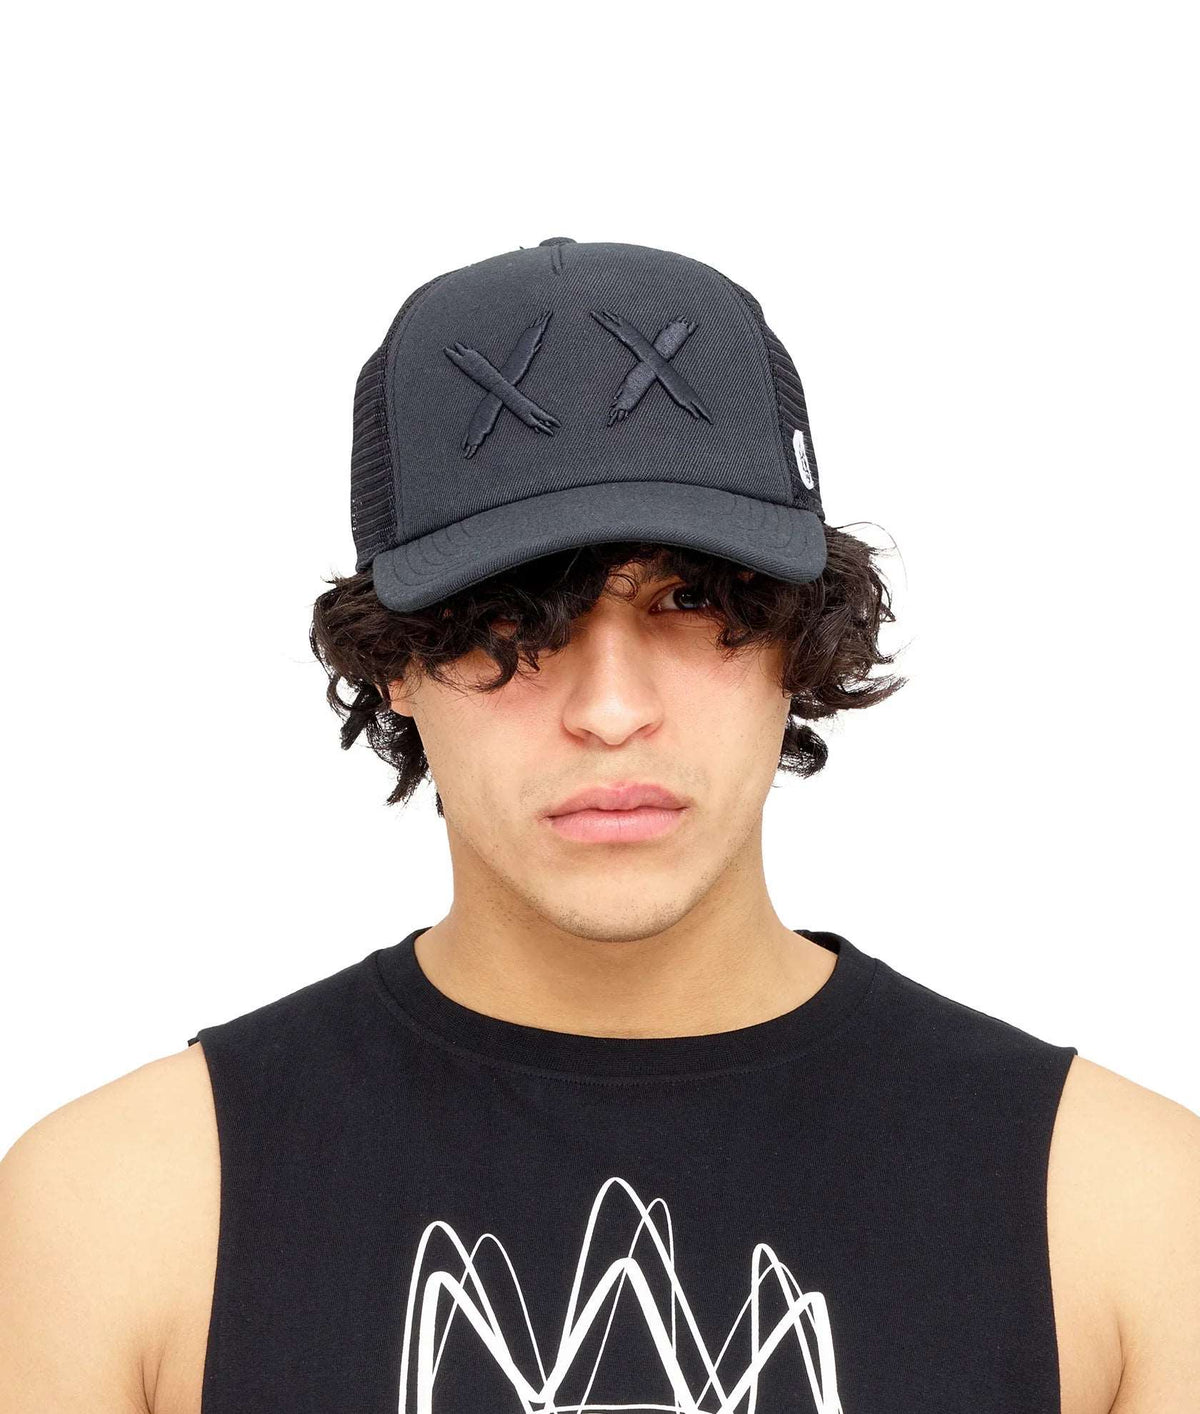 CULT OF INDIVIDUALITY MESH BACK TRUCKER CURVED VISOR W/ BLACK, BLACK LOGO , BLACK VISOR, BLACK MESH - Gravity NYC